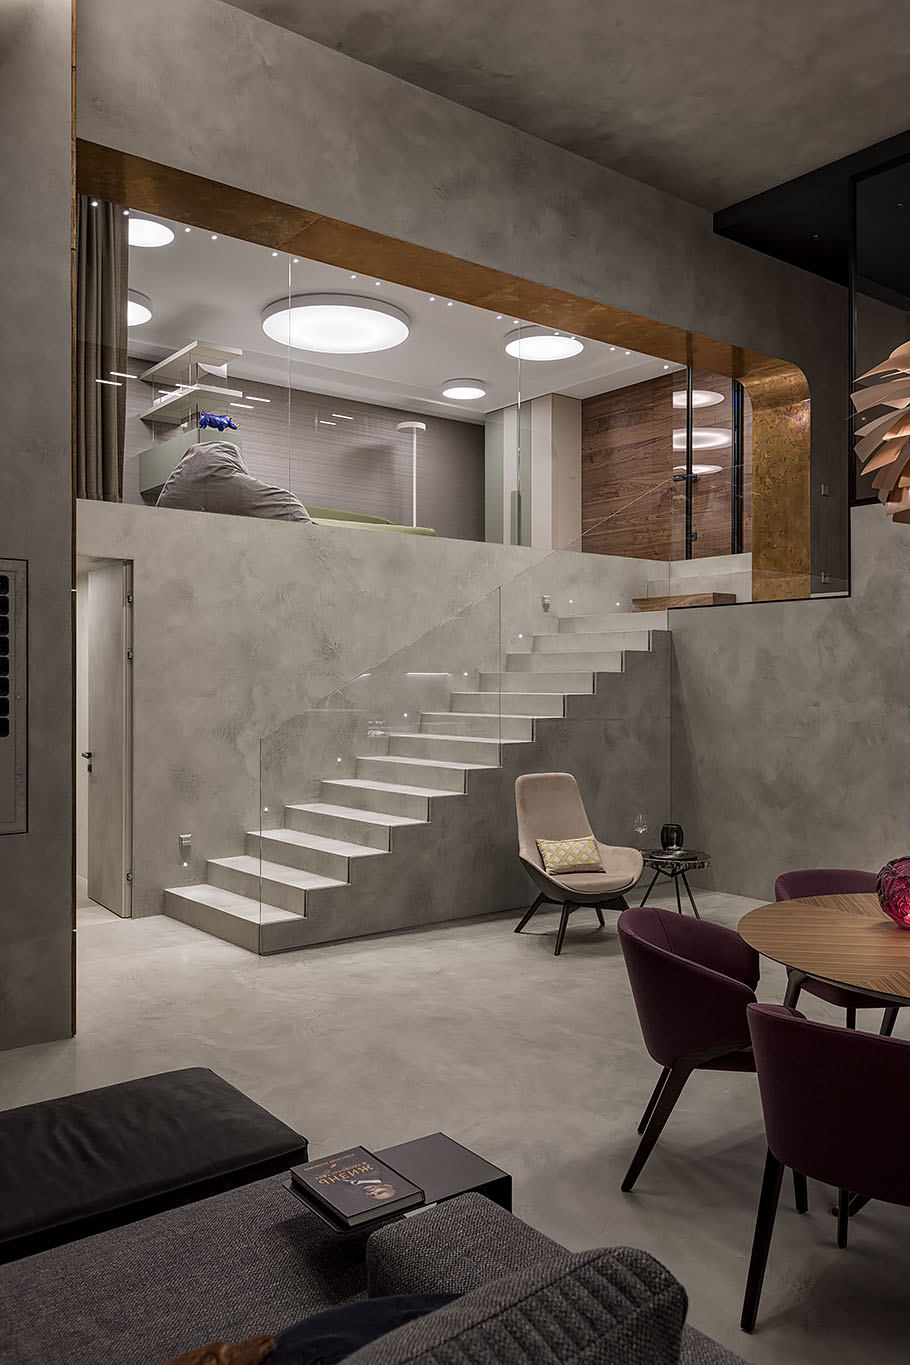 Luxurious apartment with microcement on walls, stairs and floor.